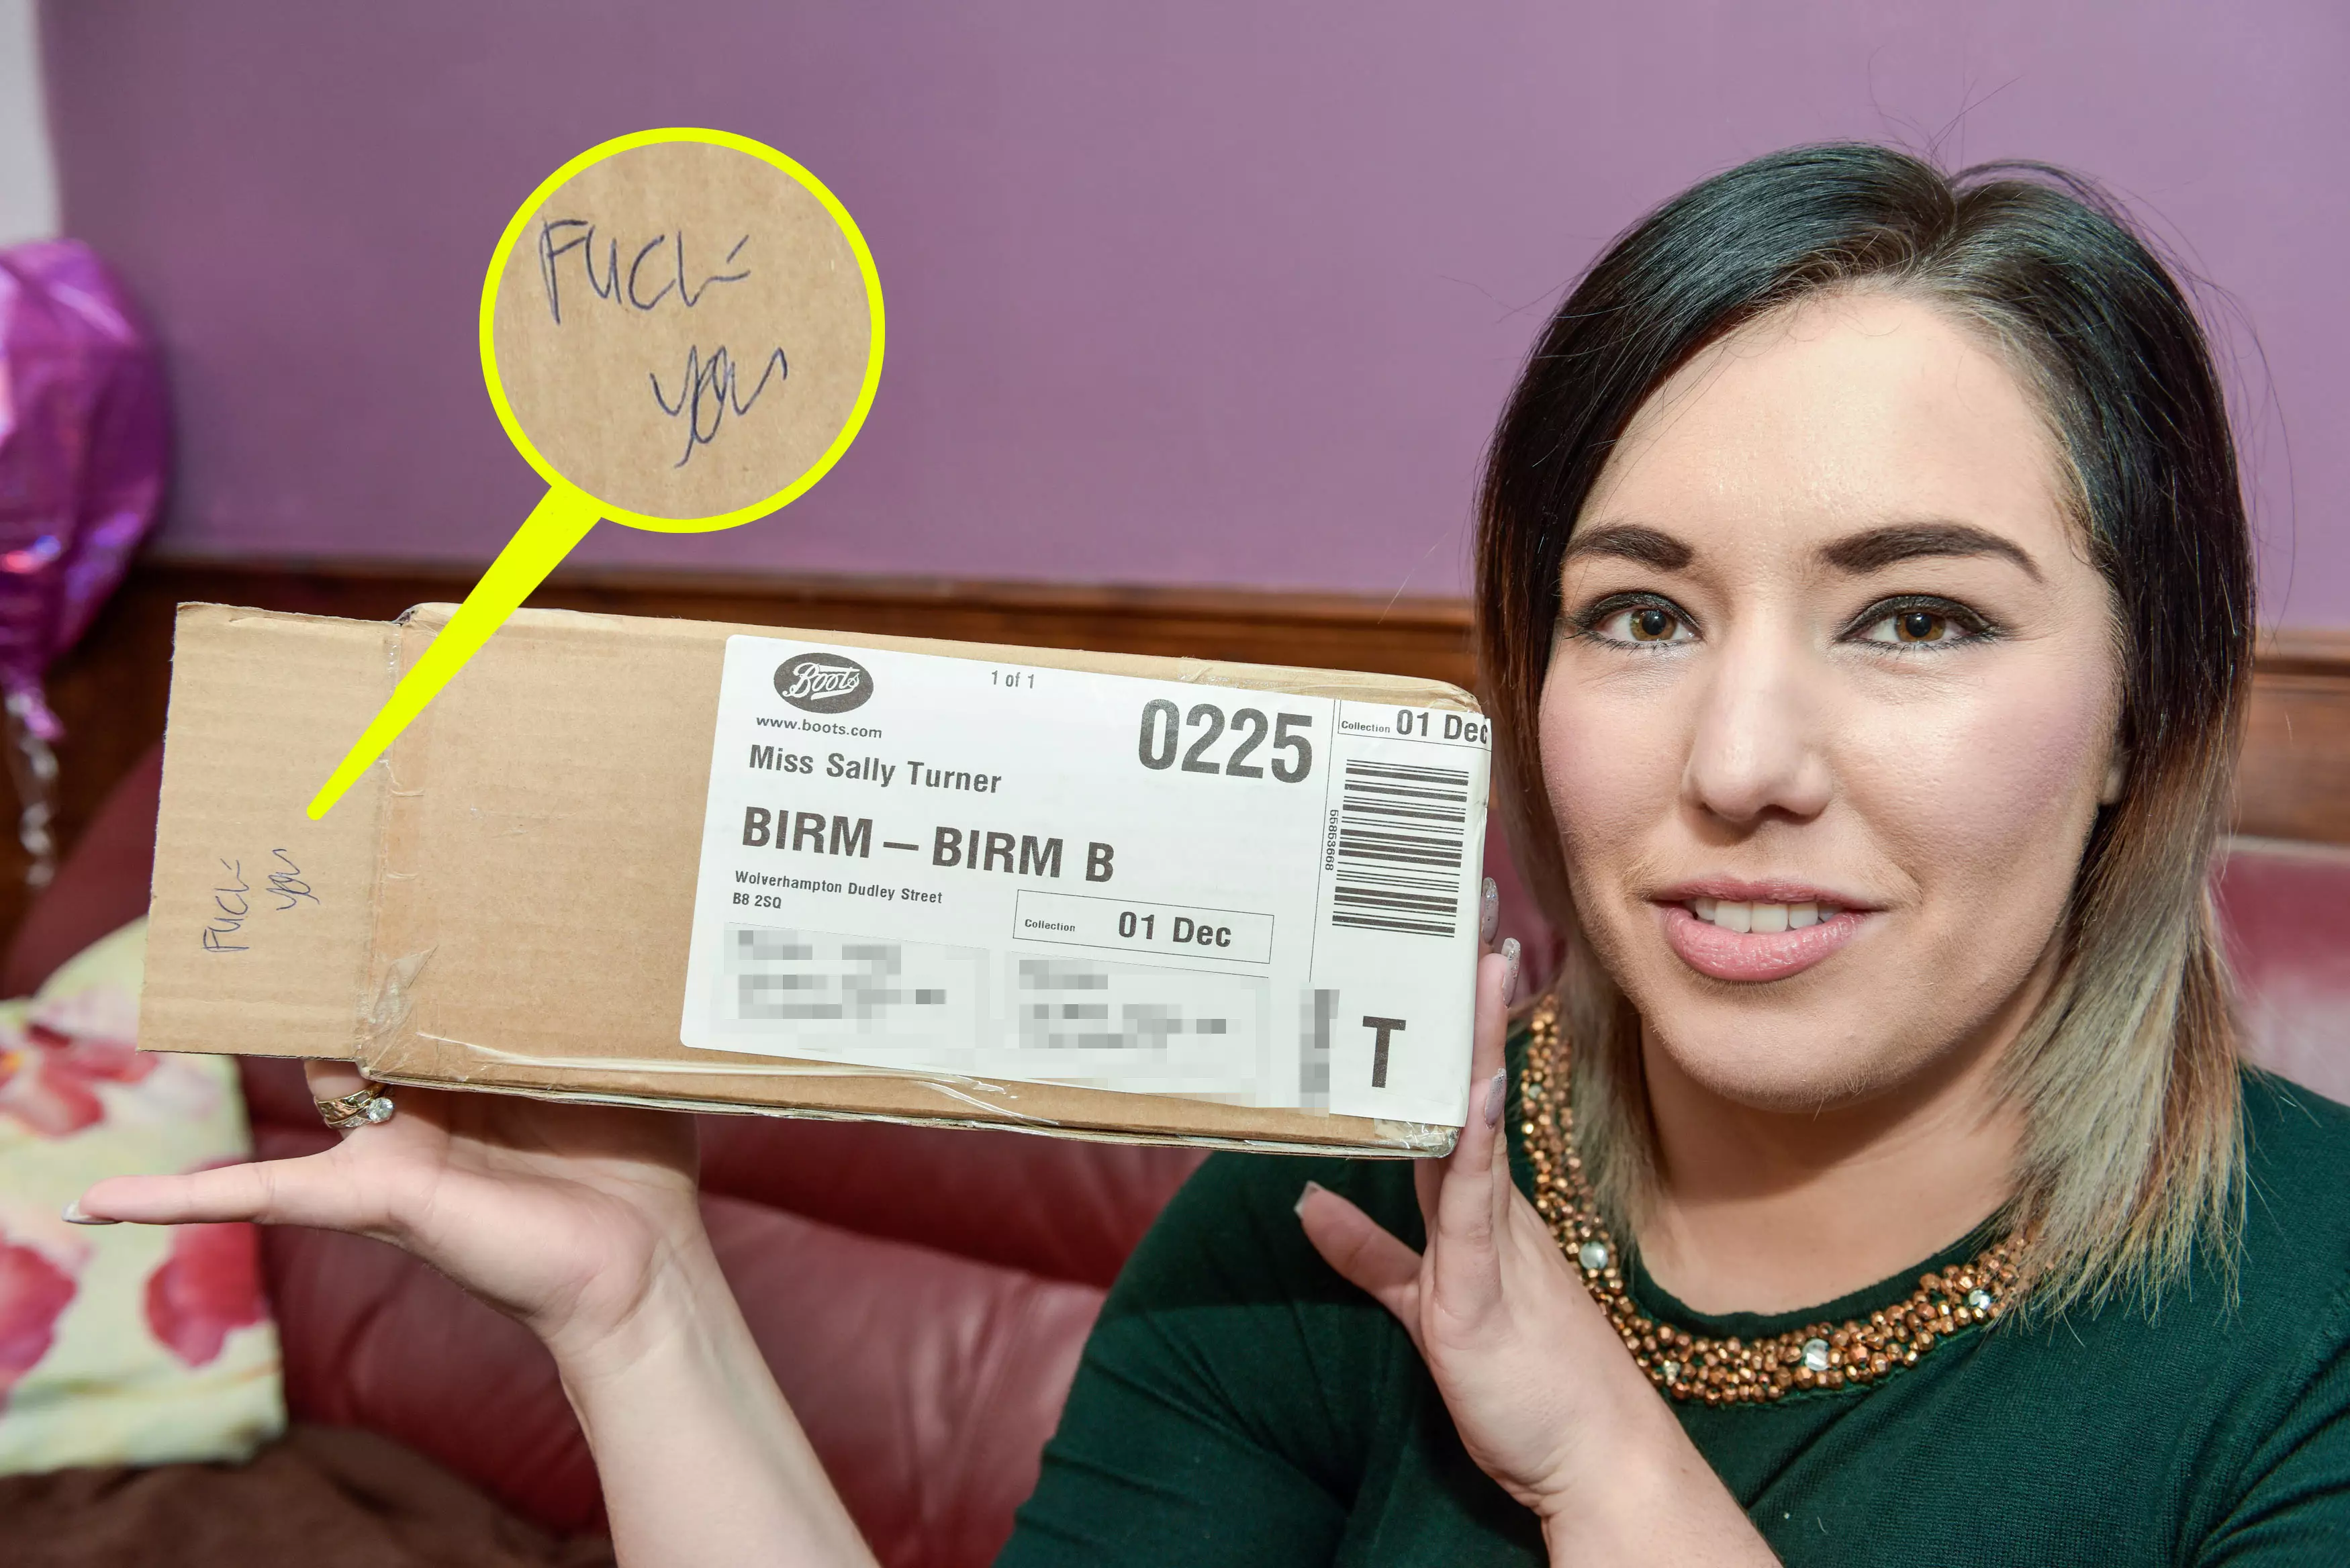 Woman Receives Worst Christmas Present Ever, A Note Saying 'Fuck You' 